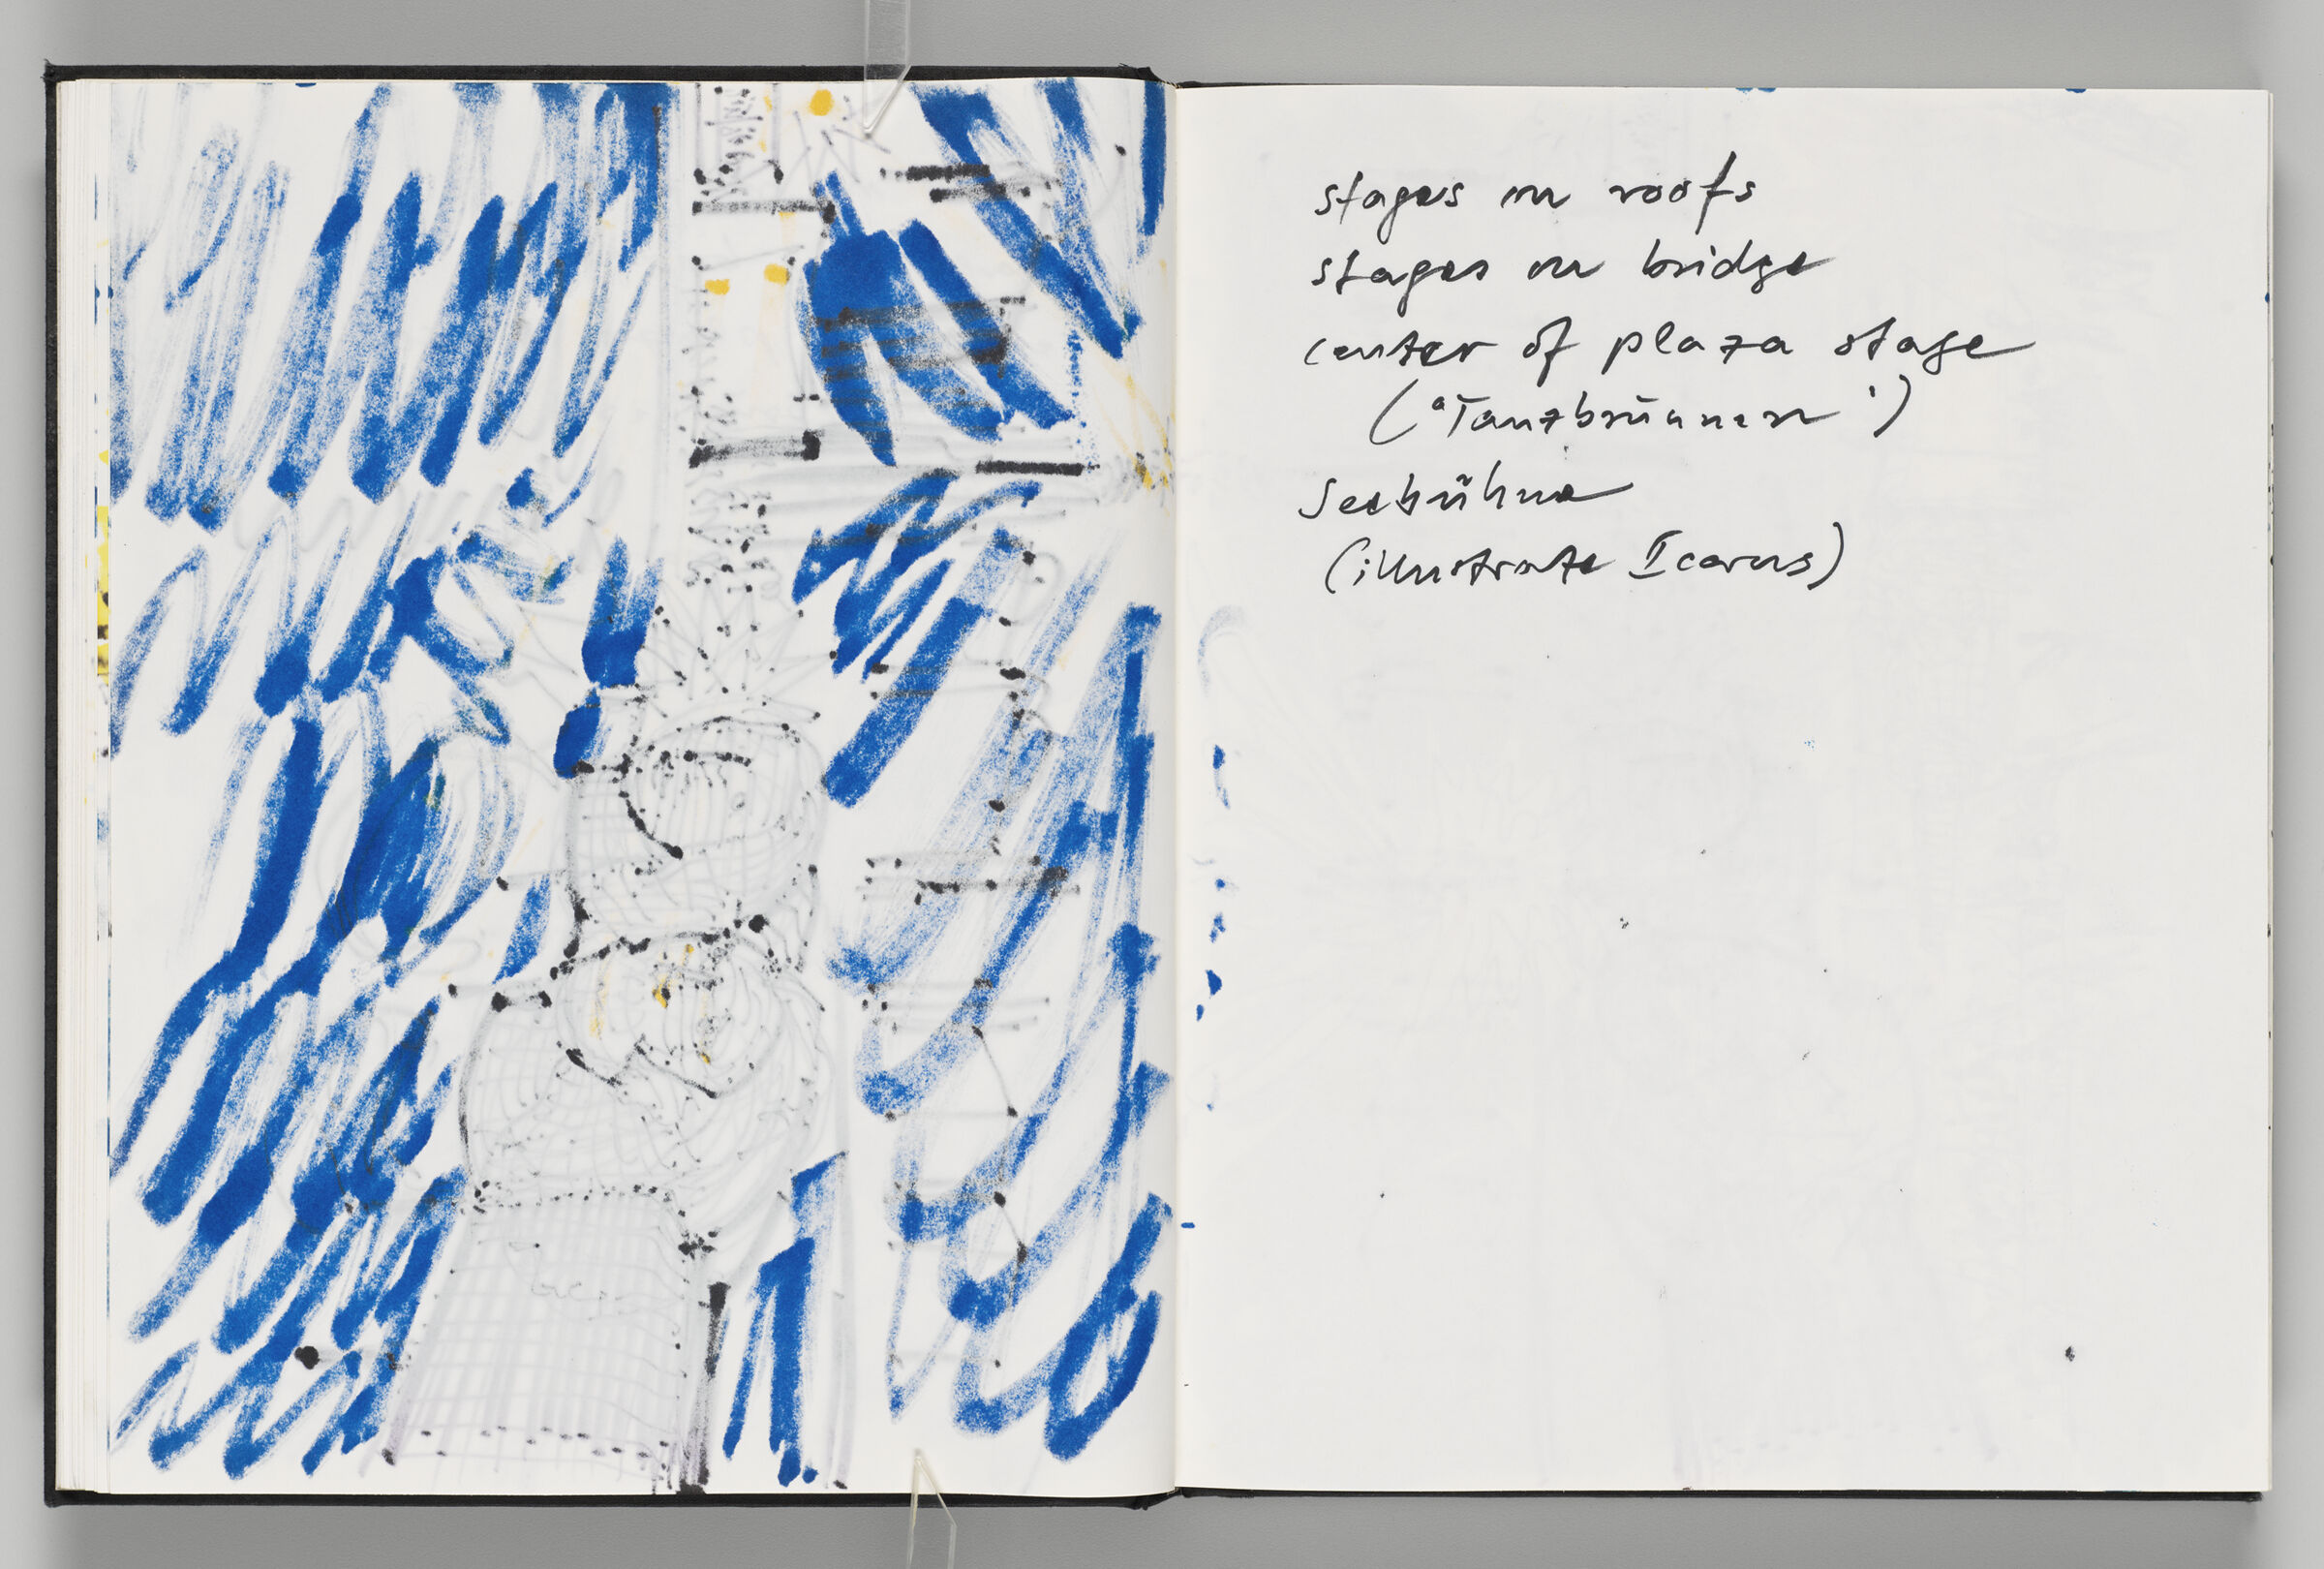 Untitled (Bleed-Through Of Previous Page, Left Page); Untitled (Notes, Right Page)
